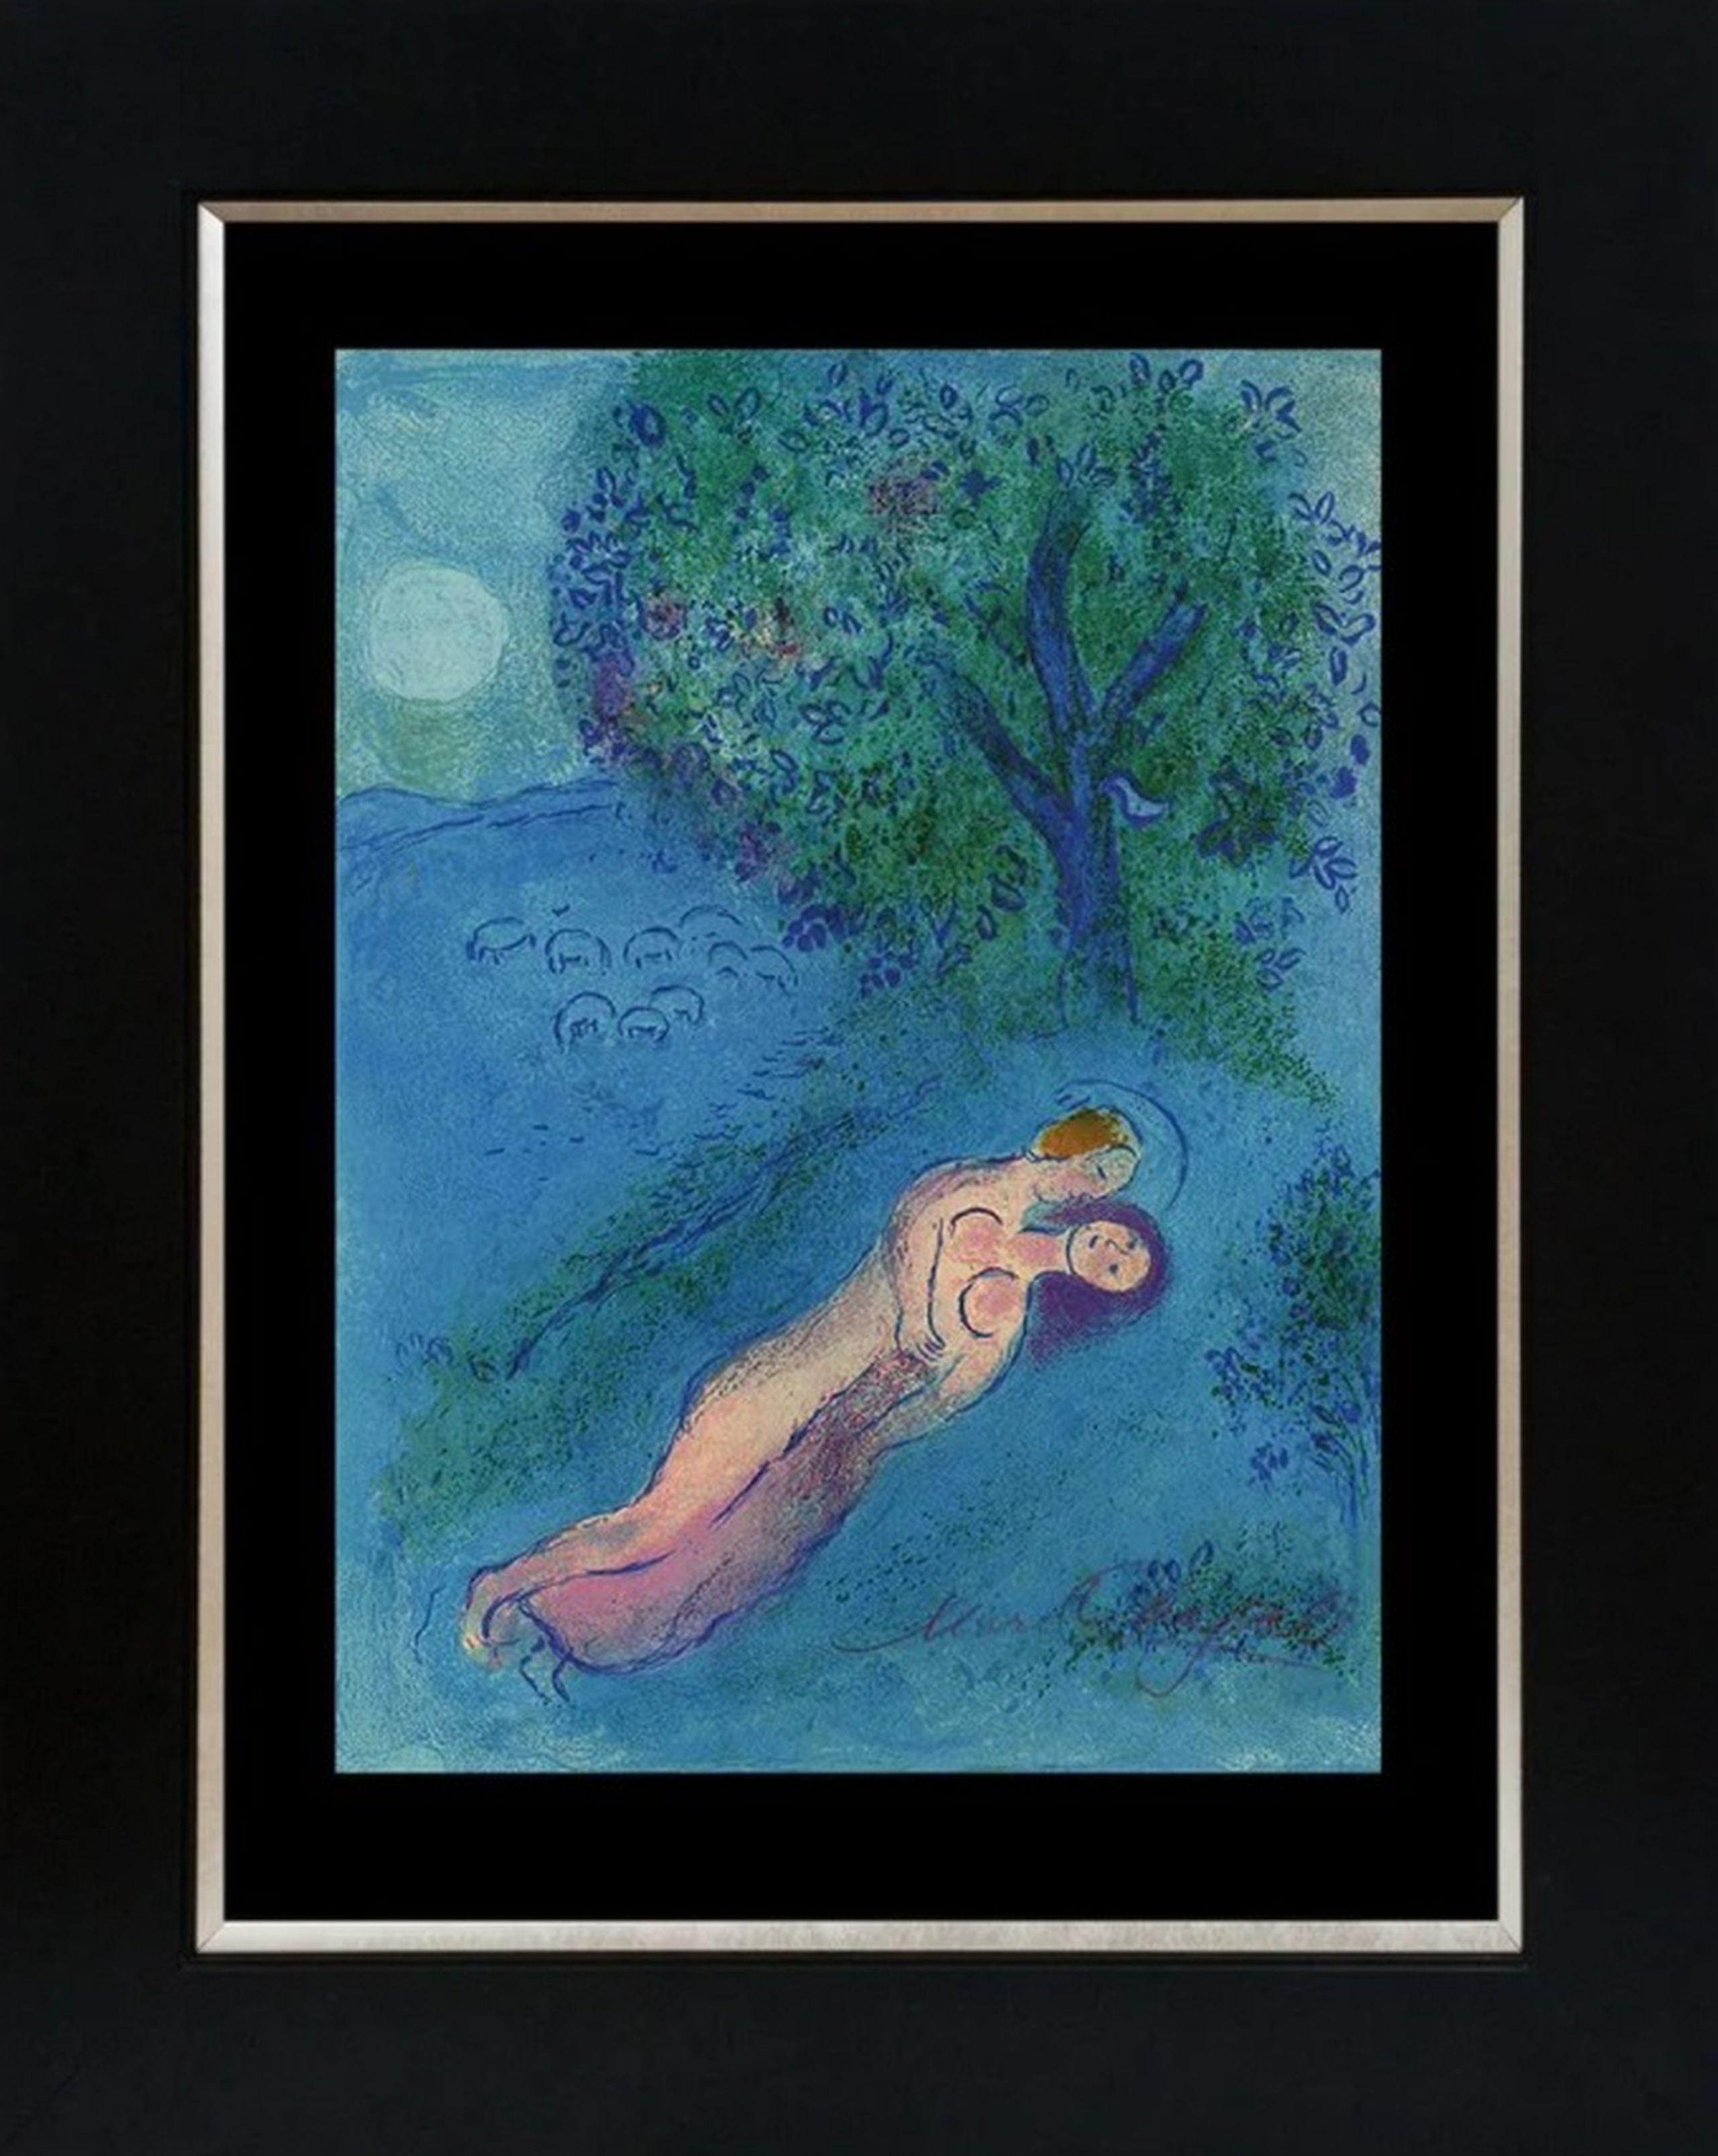 Daphnis and Chloe Suite. 1977, lithography, 33x25 cm  - Print by Marc Chagall